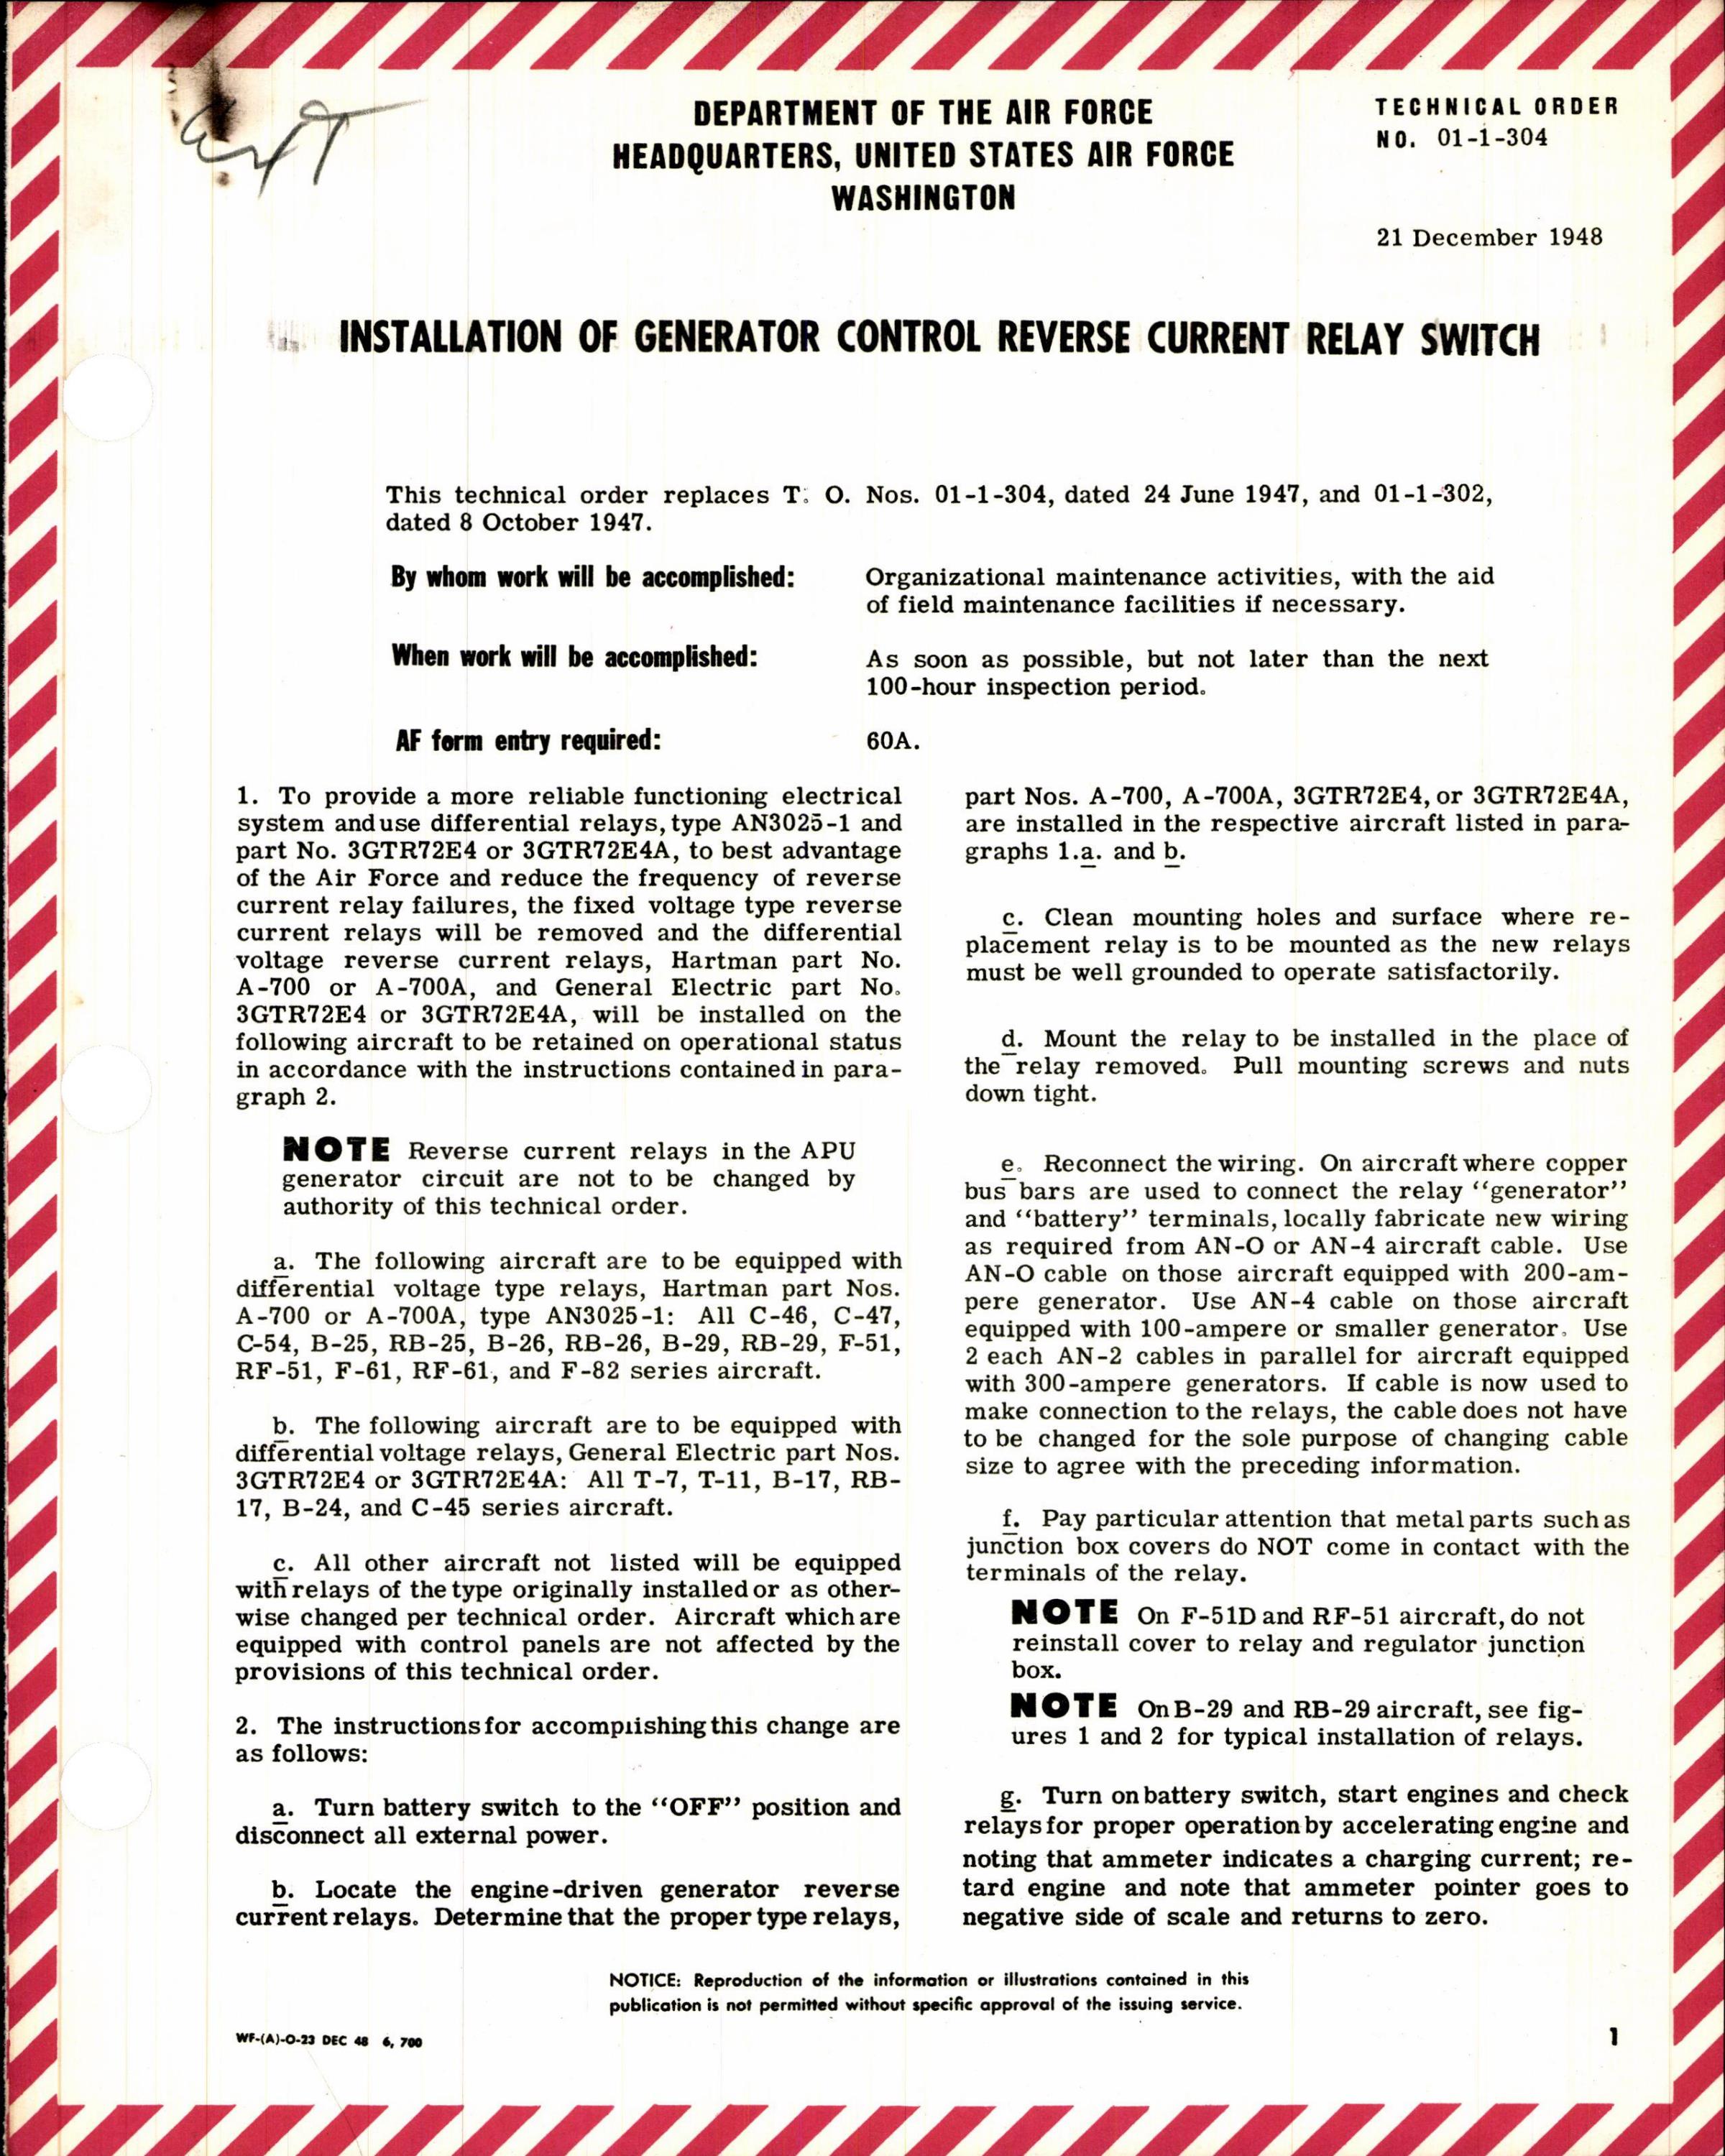 Sample page 1 from AirCorps Library document: Installation of Generator Control Reverse Current Relay Switch